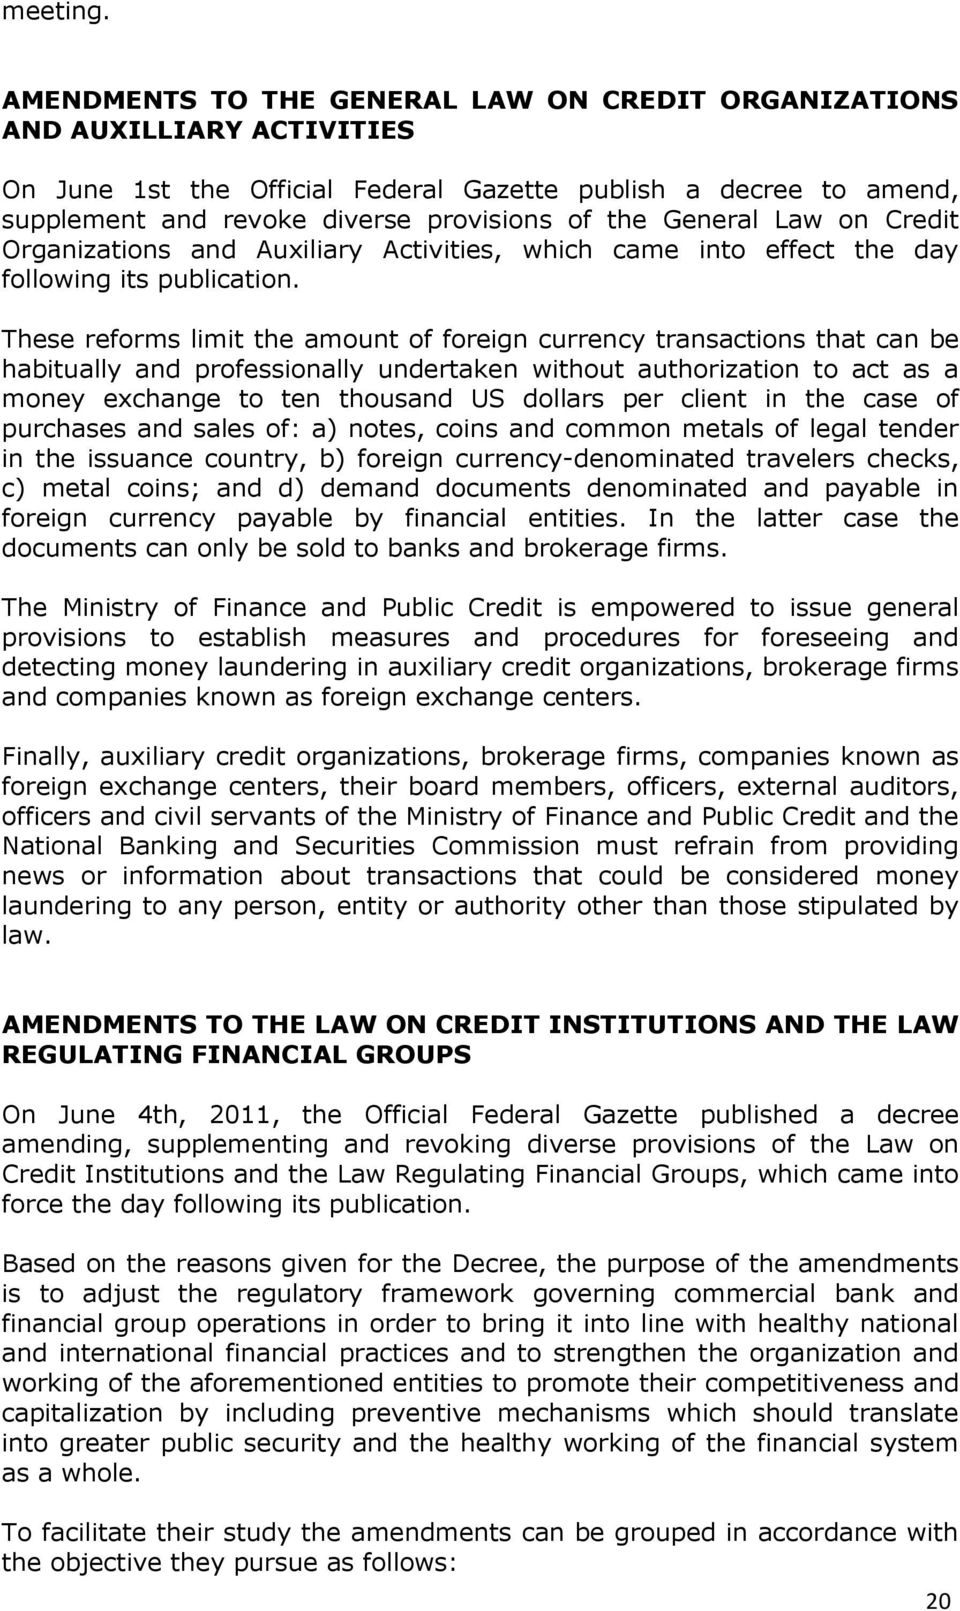 General Law on Credit Organizations and Auxiliary Activities, which came into effect the day following its publication.